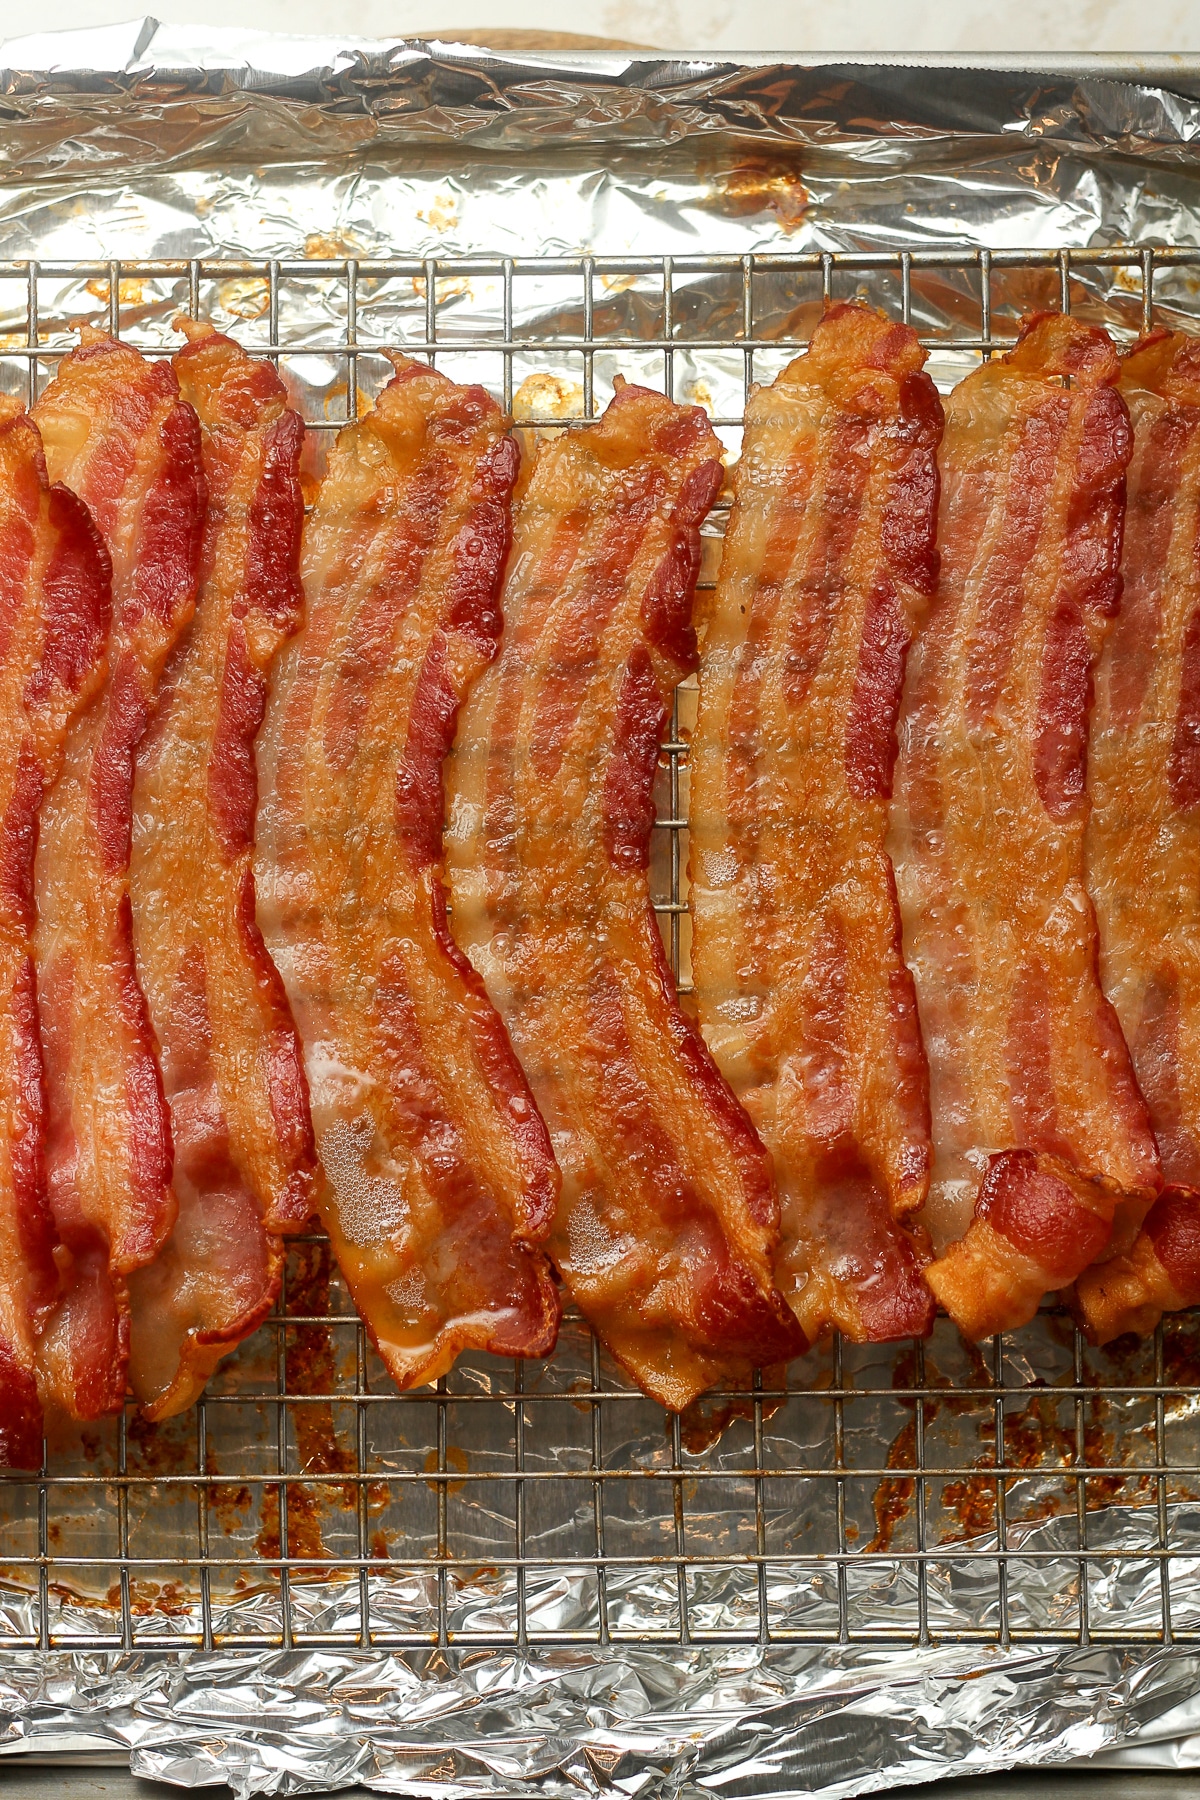 A pan of the baked bacon.